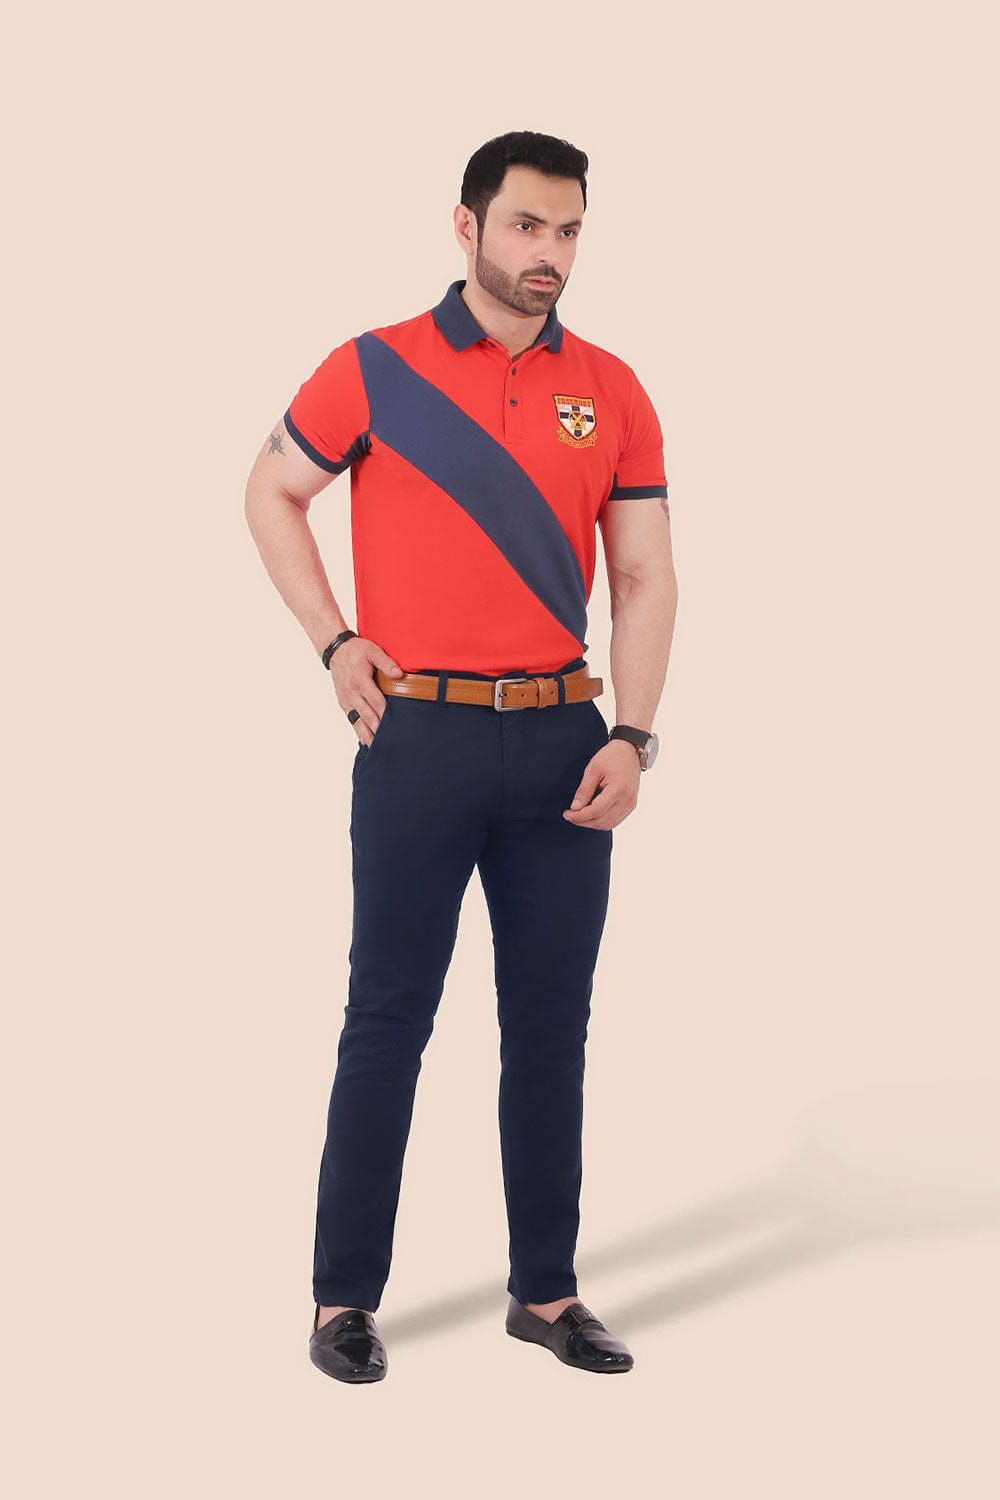 Hope Not Out by Shahid Afridi Men Chino Slim Fit Chino